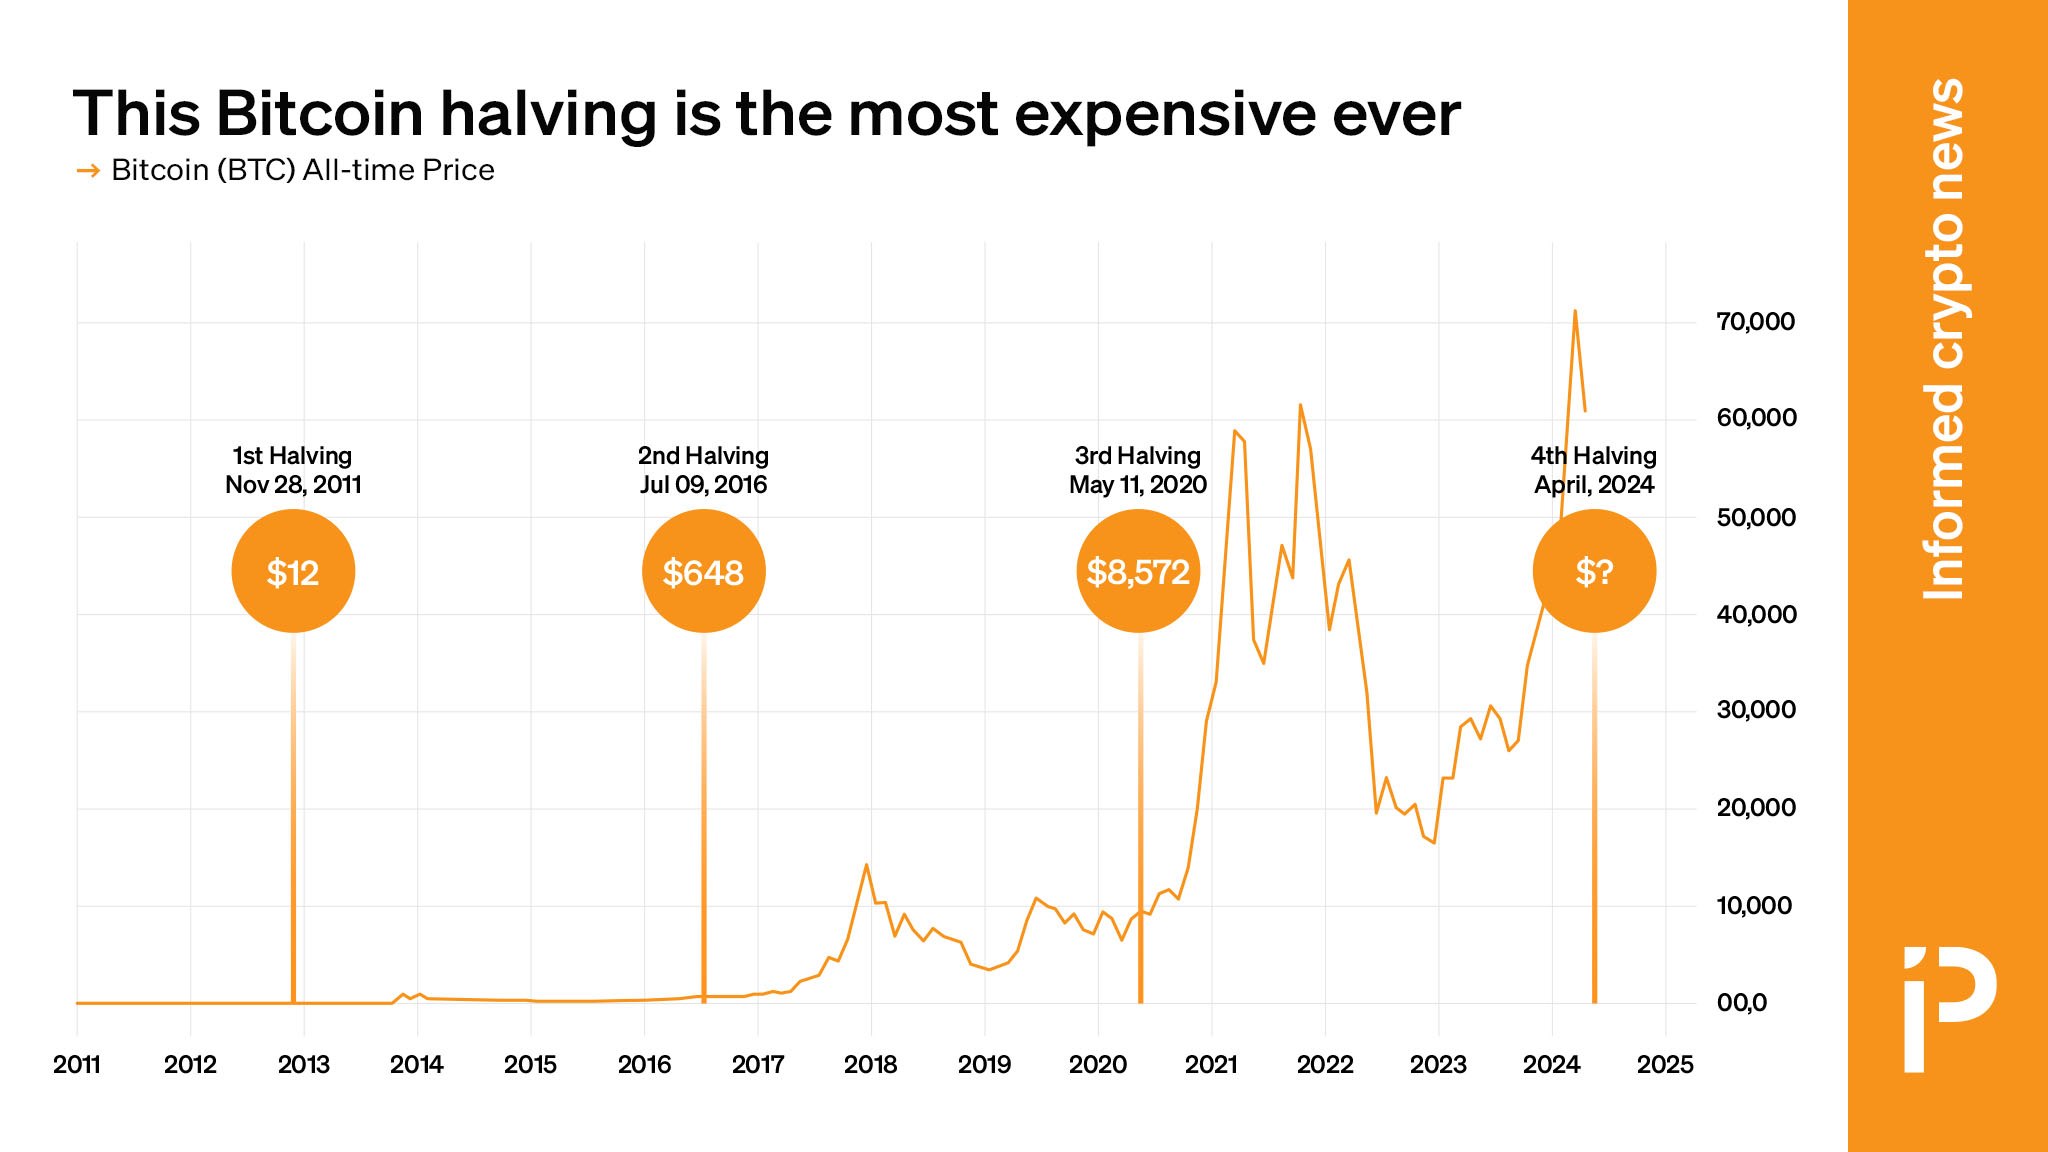 This Bitcoin halving is the most expensive ever